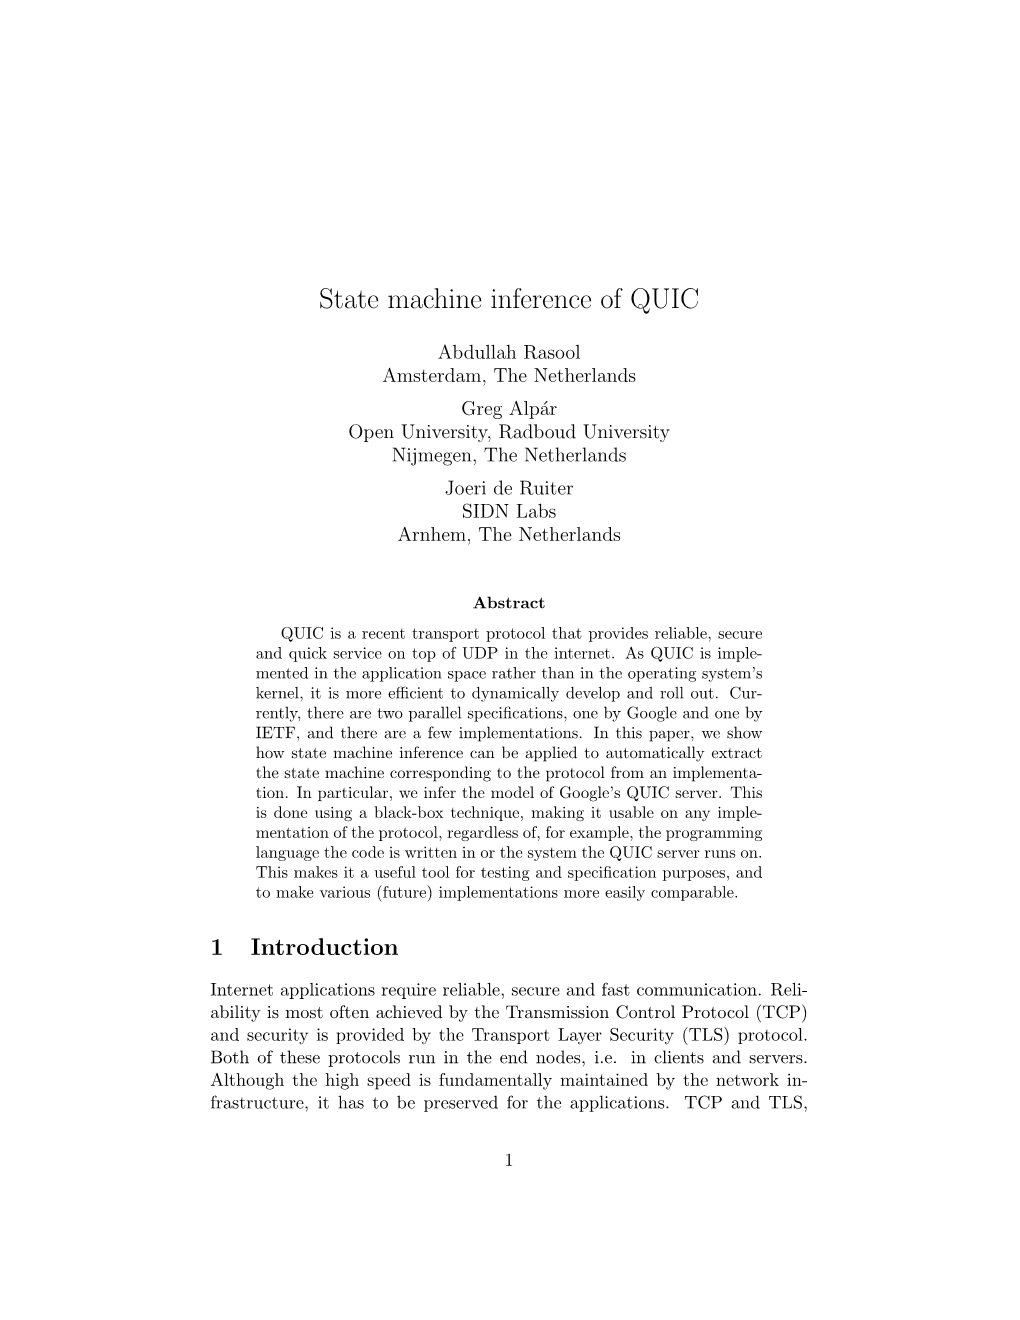 State Machine Inference of QUIC